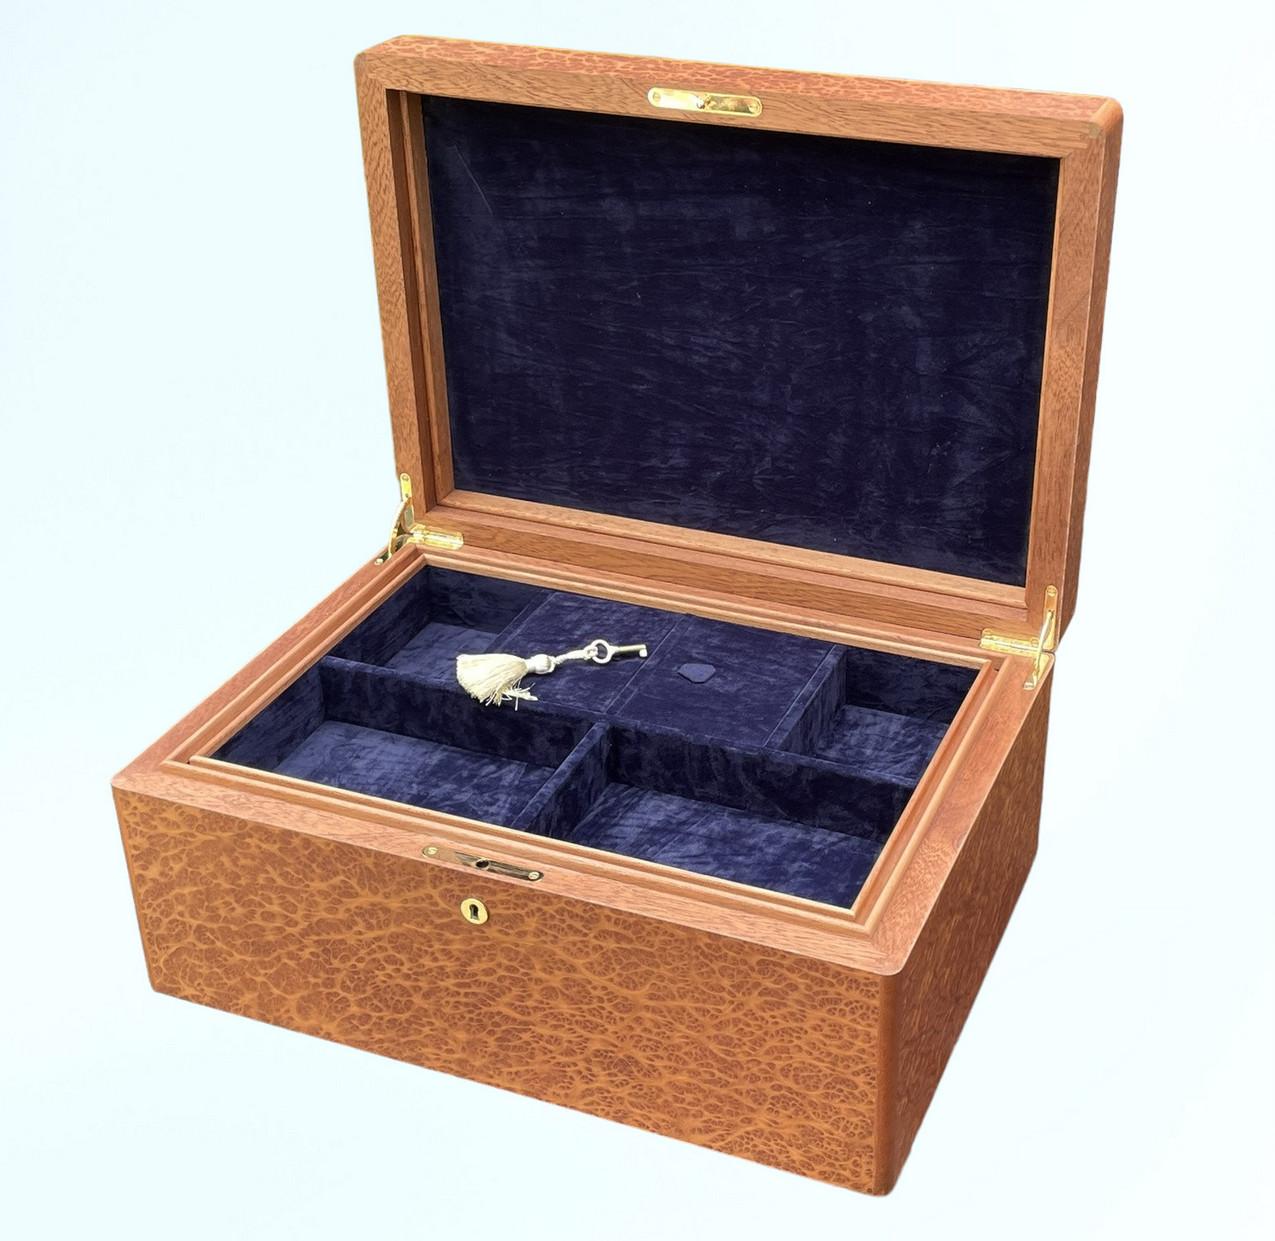 This Vavona Wooden Jewelry Casket was manufactured by the Famed Manning of Ireland Company and is truly a Jewel of handcrafted genius. This box is constructed of the finest woods available and the knowledge and skill of 4 generations of box making